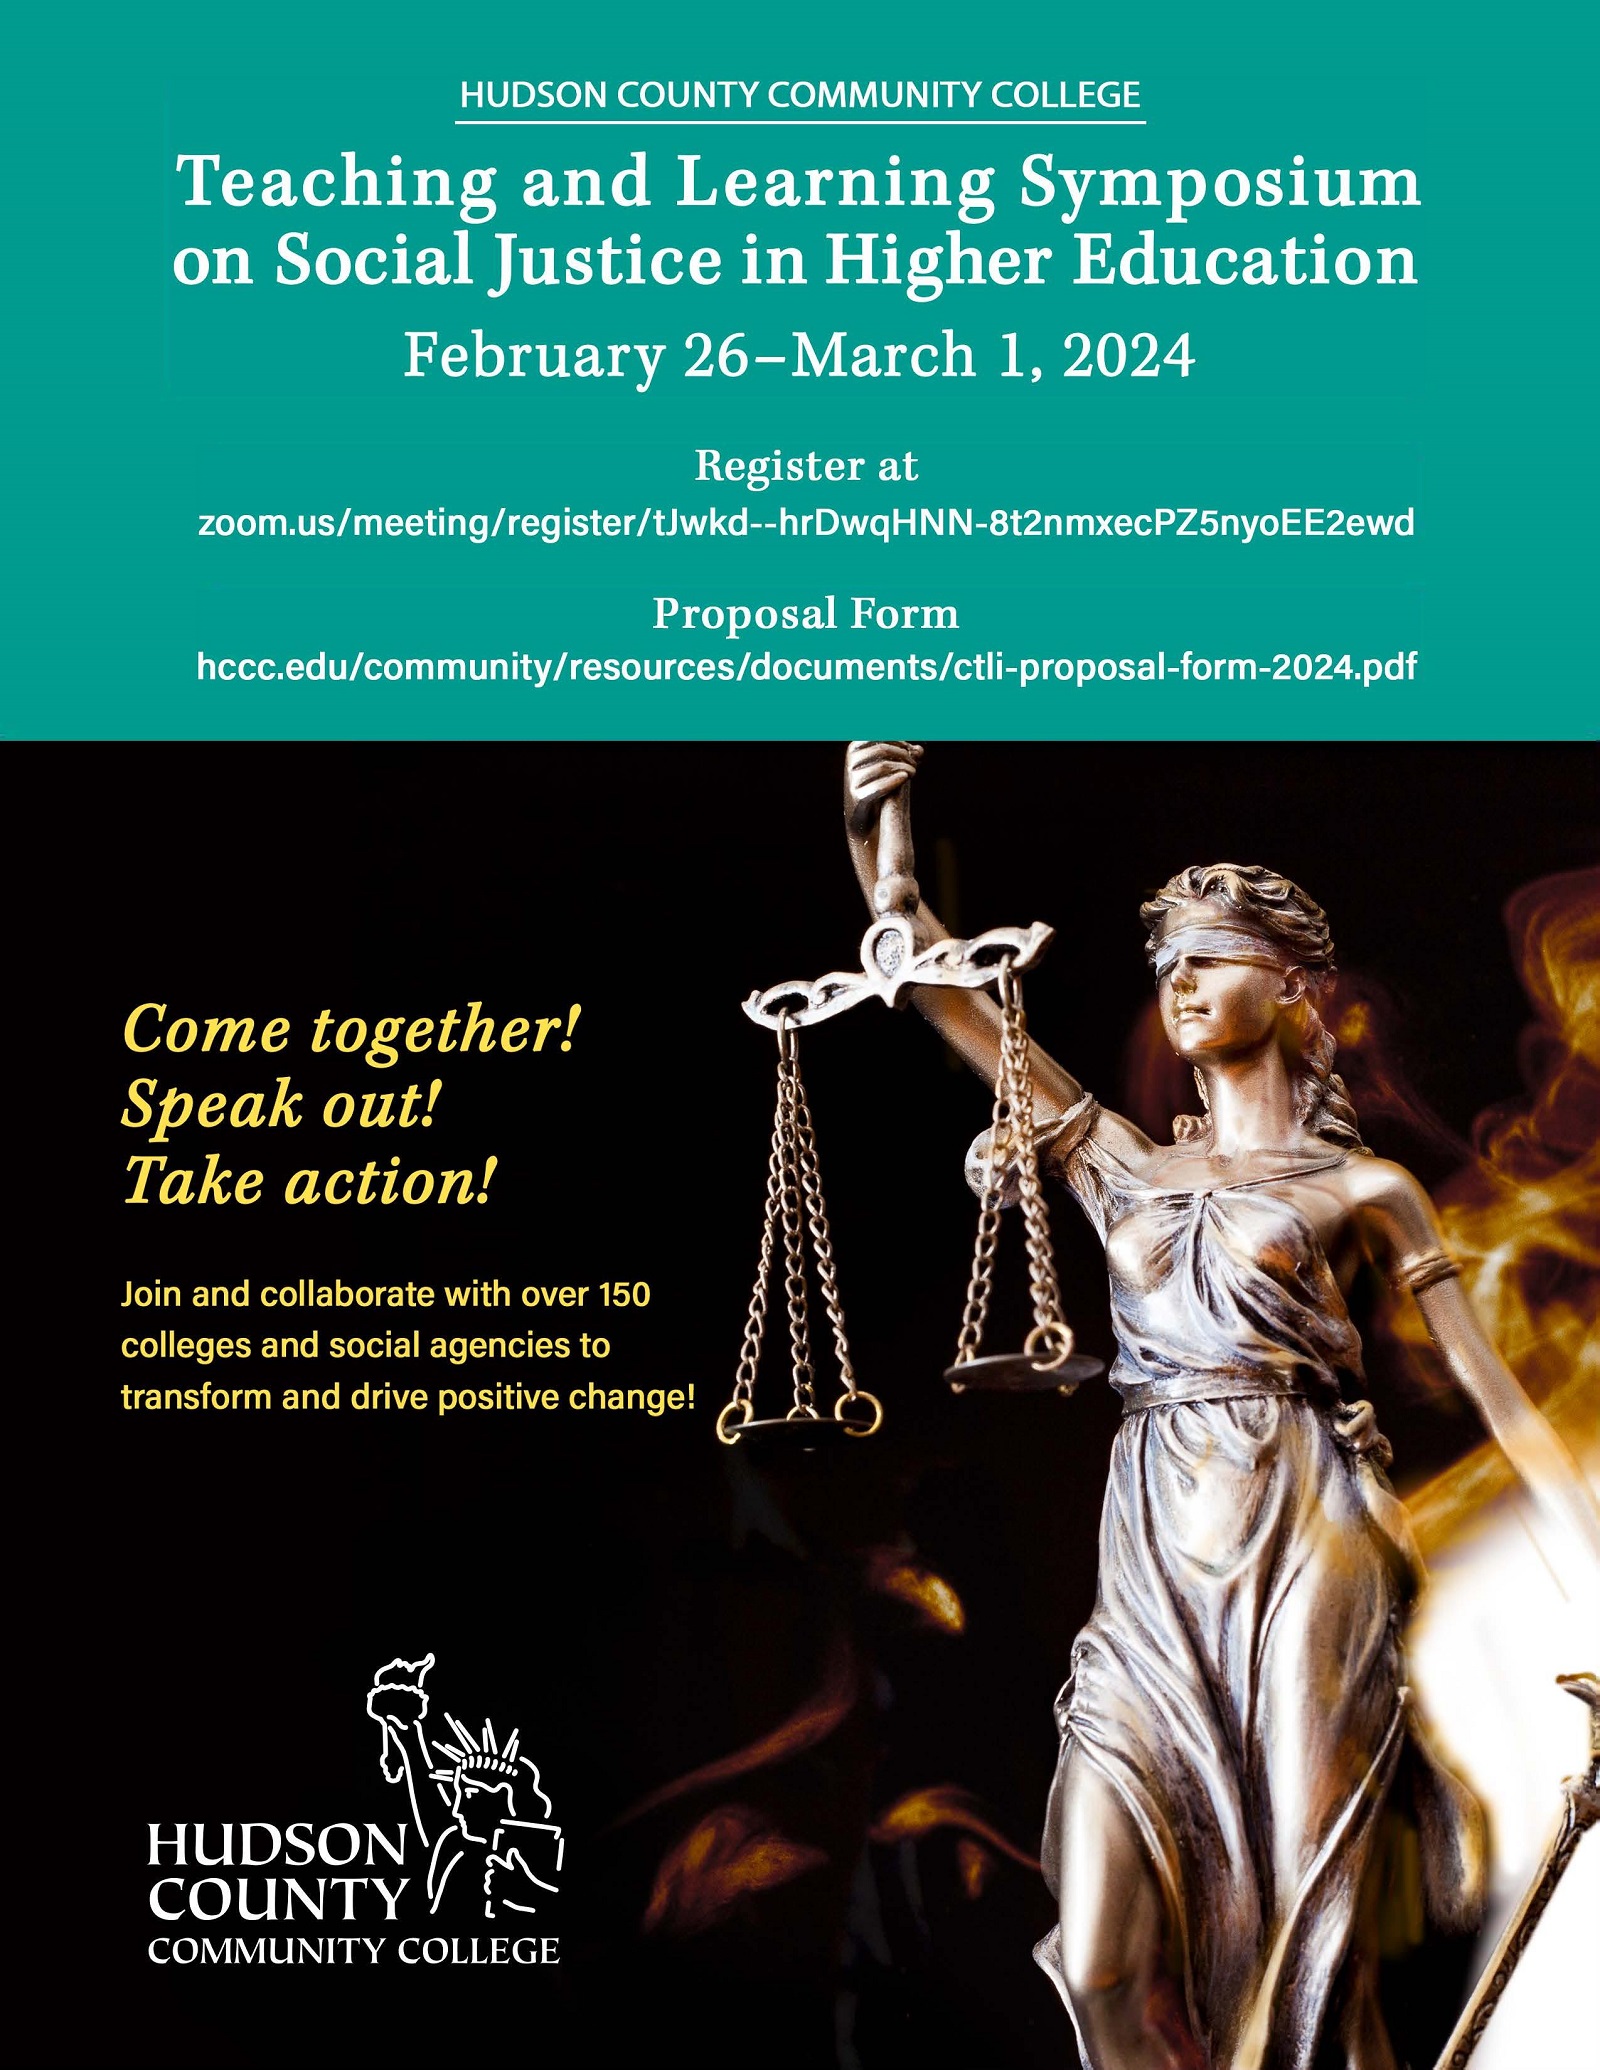 Teaching and Learning Symposium on Social Justice in Higher Education 2024